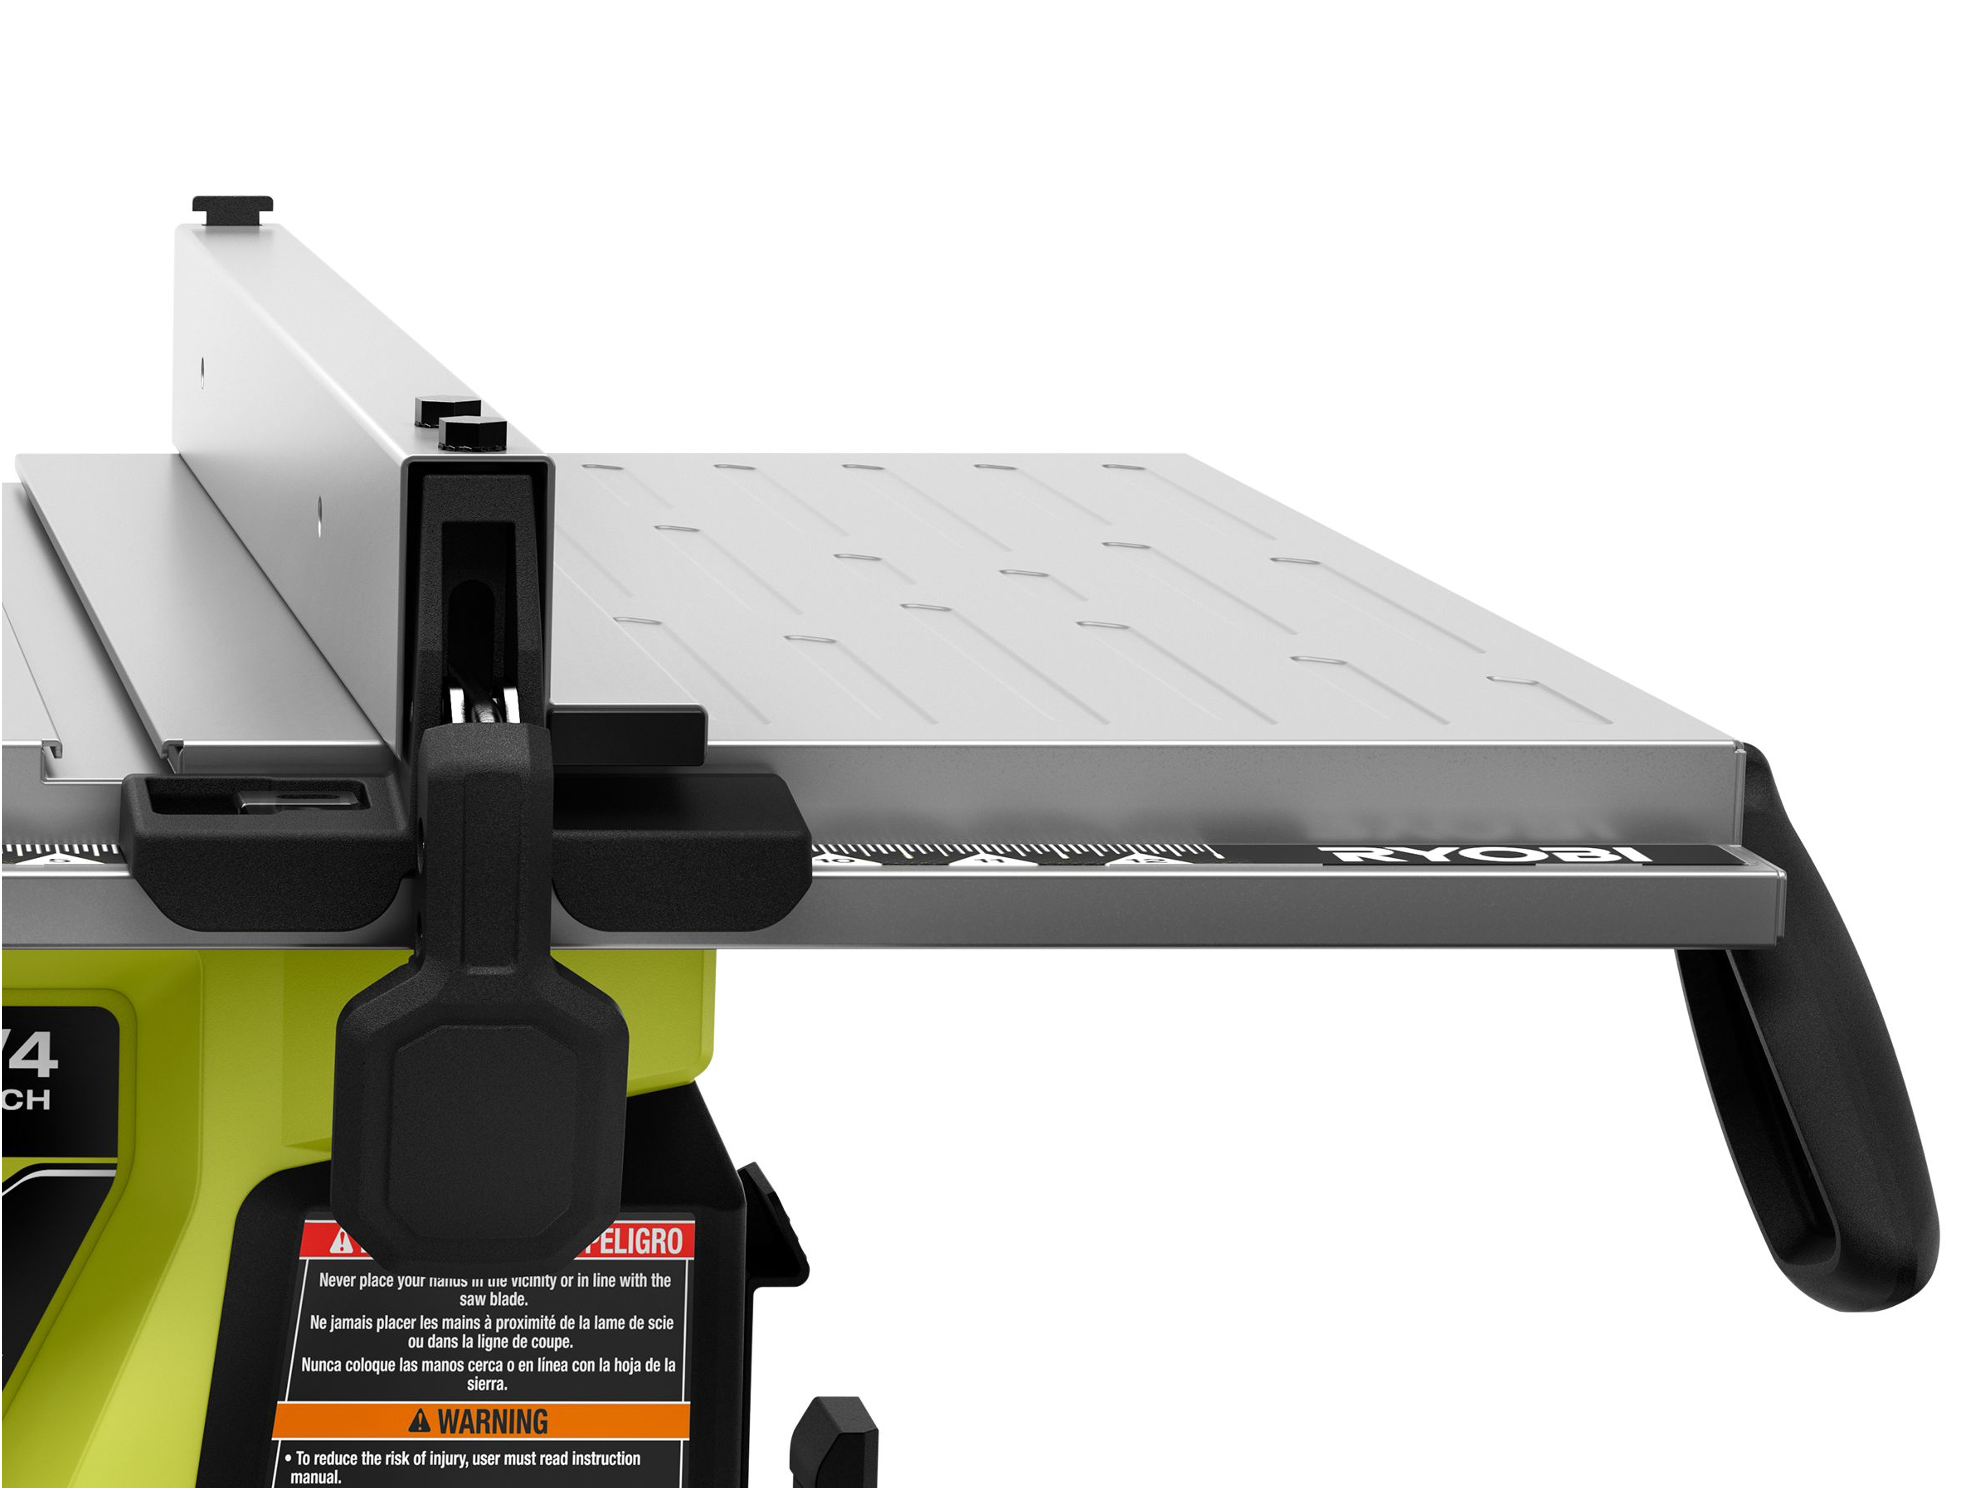 Product Features Image for 18V ONE+ HP BRUSHLESS 8-1/4" TABLE SAW KIT.